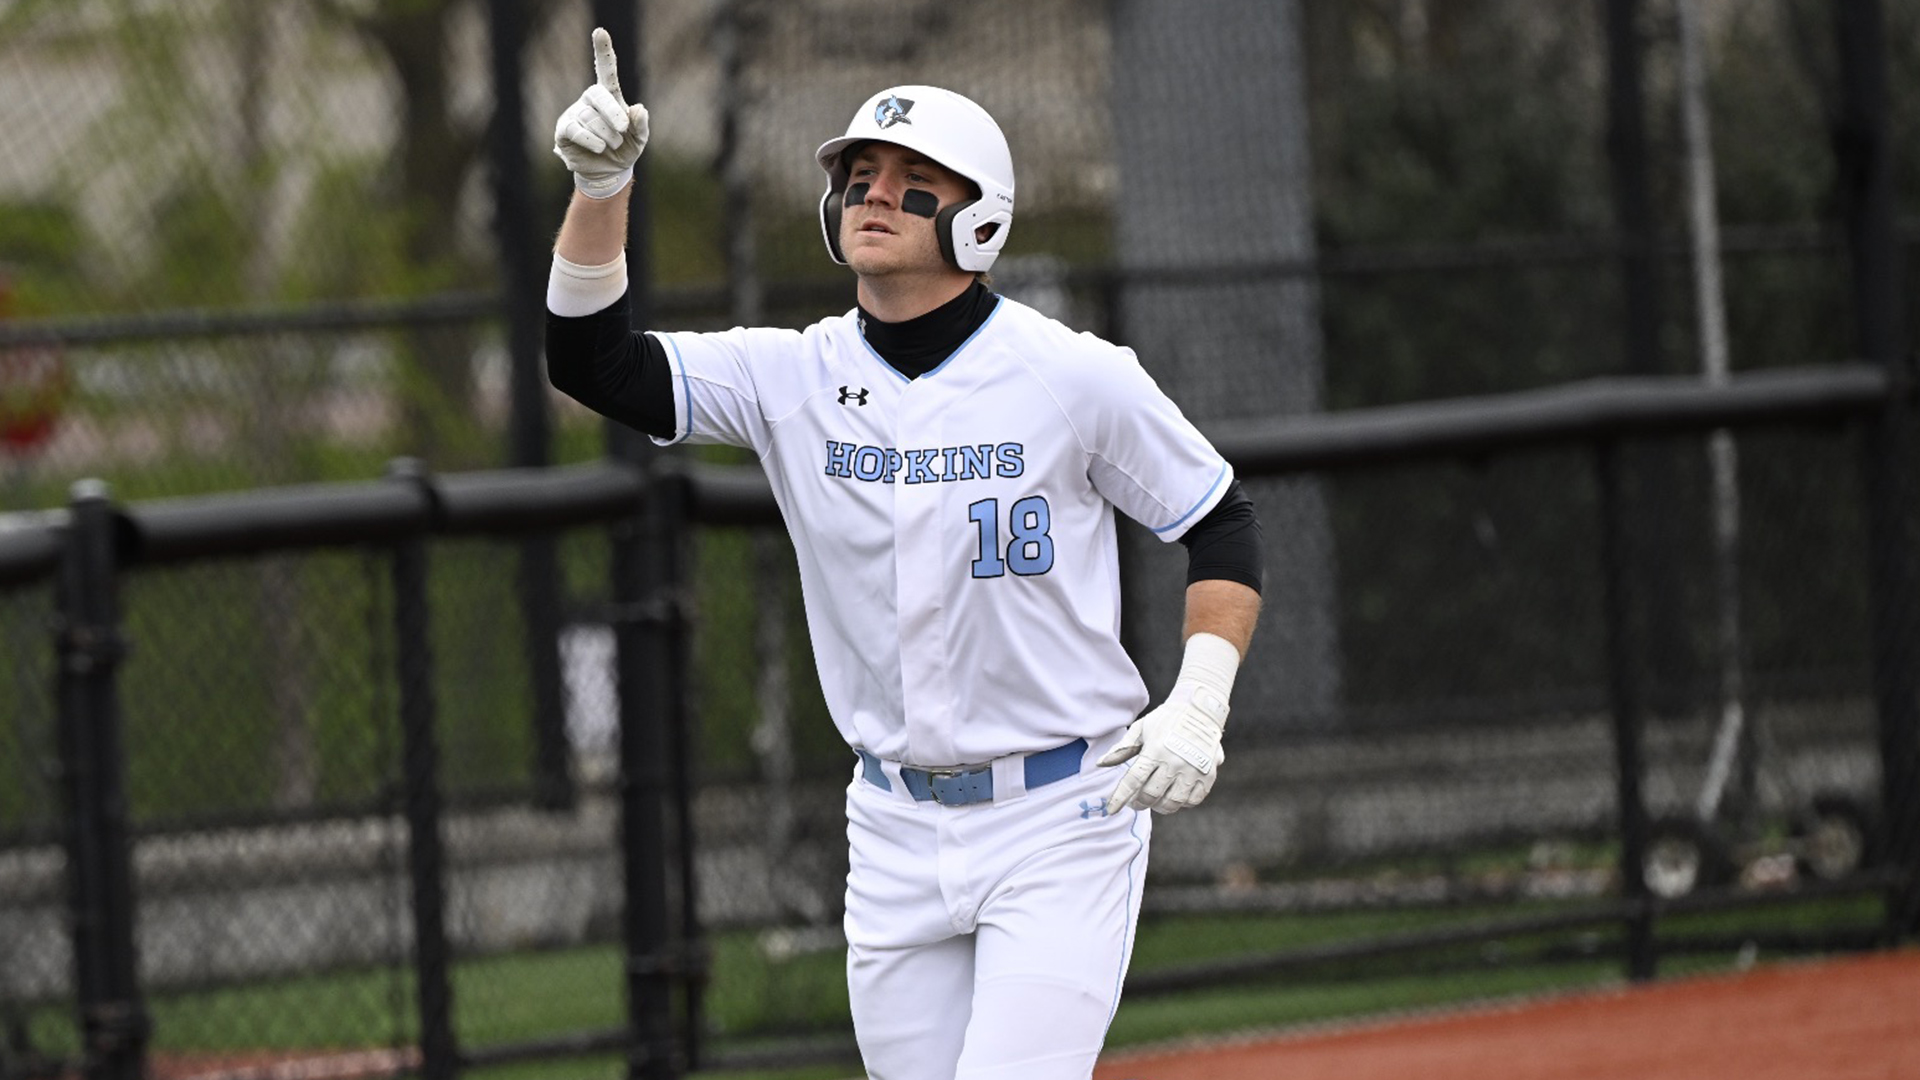 Cooper Named Regional Player of the Year; 13 Honored on ABCA, D3Baseball.com All-Region Teams